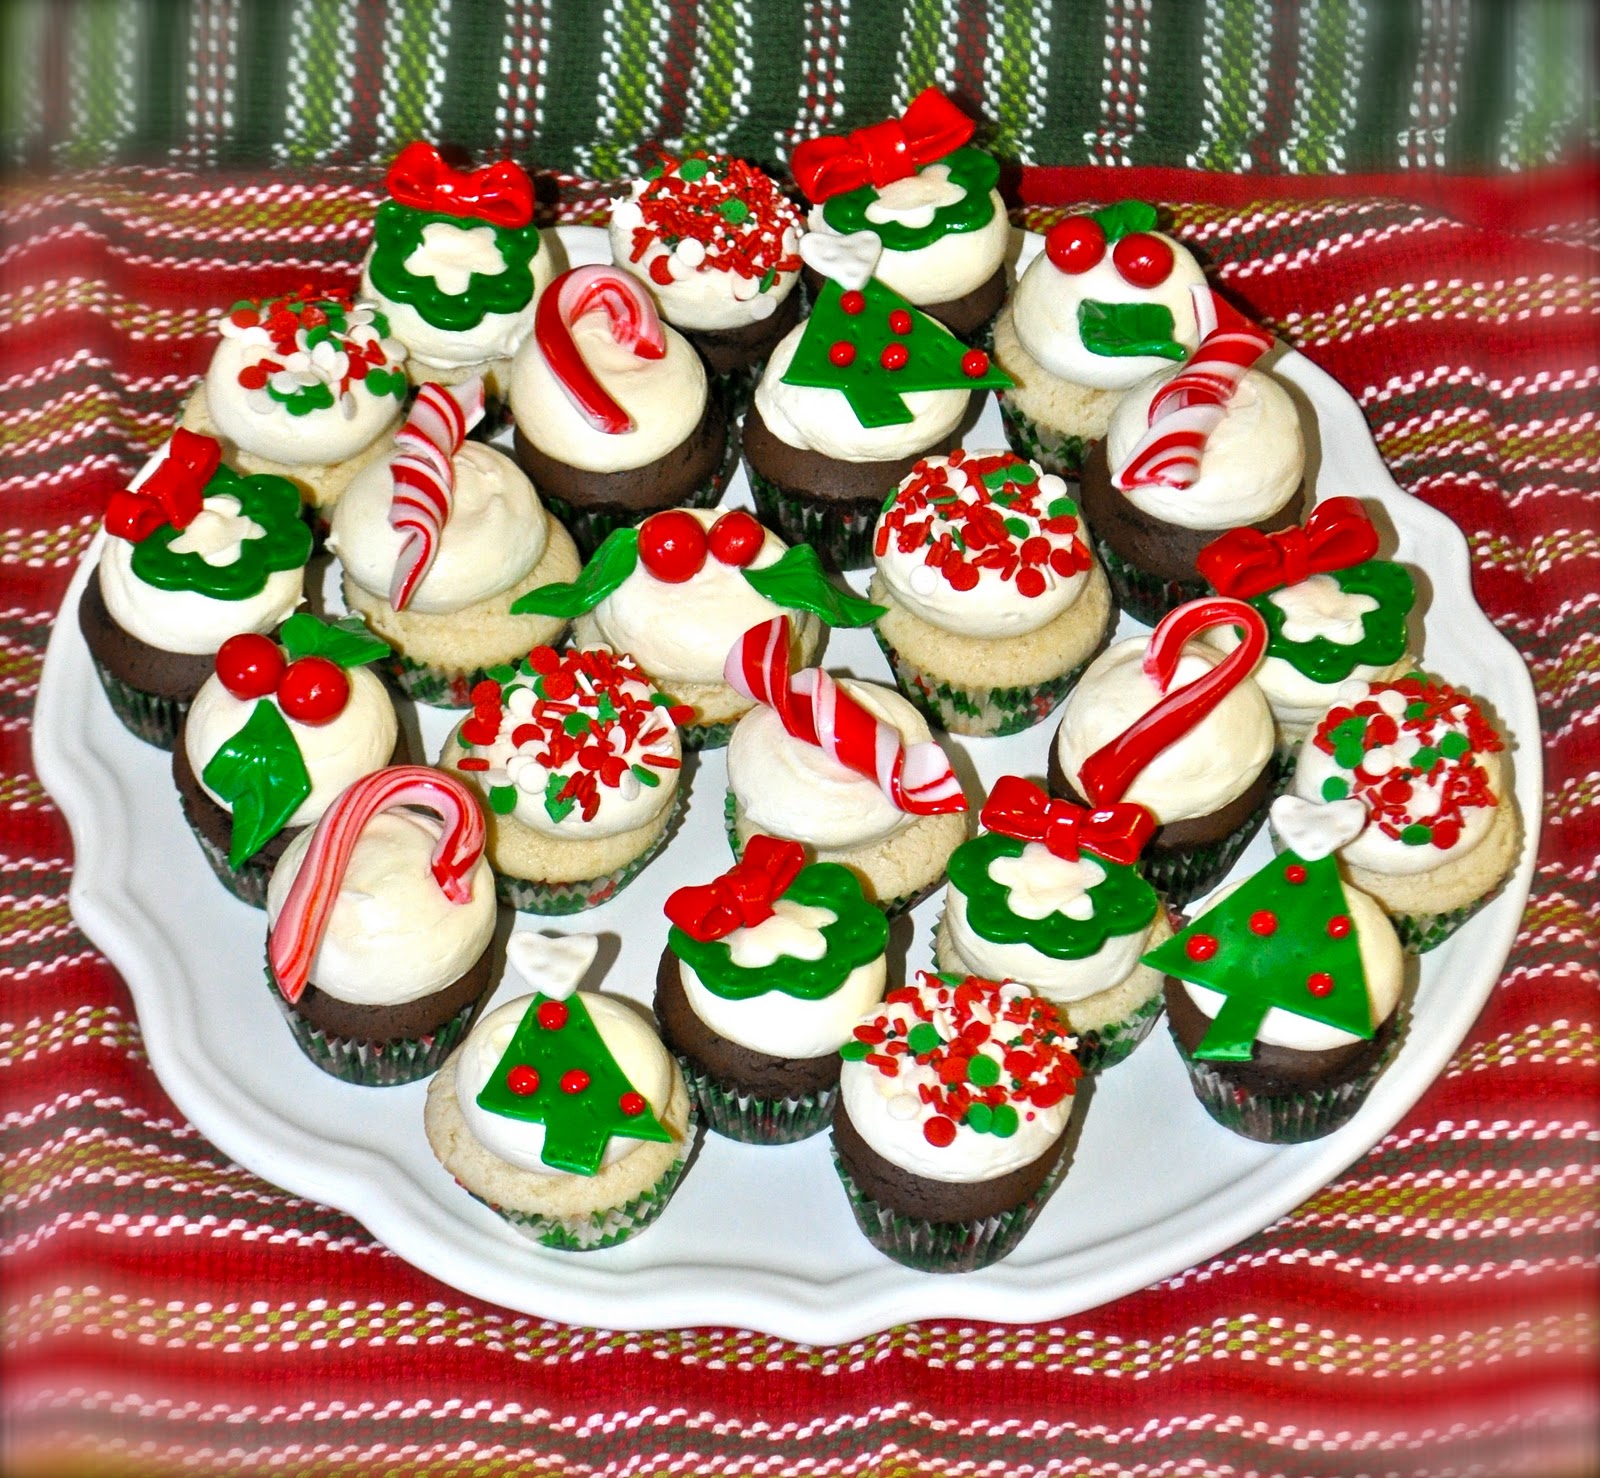 Coolest Cupcakes: Christmas Cupcakes